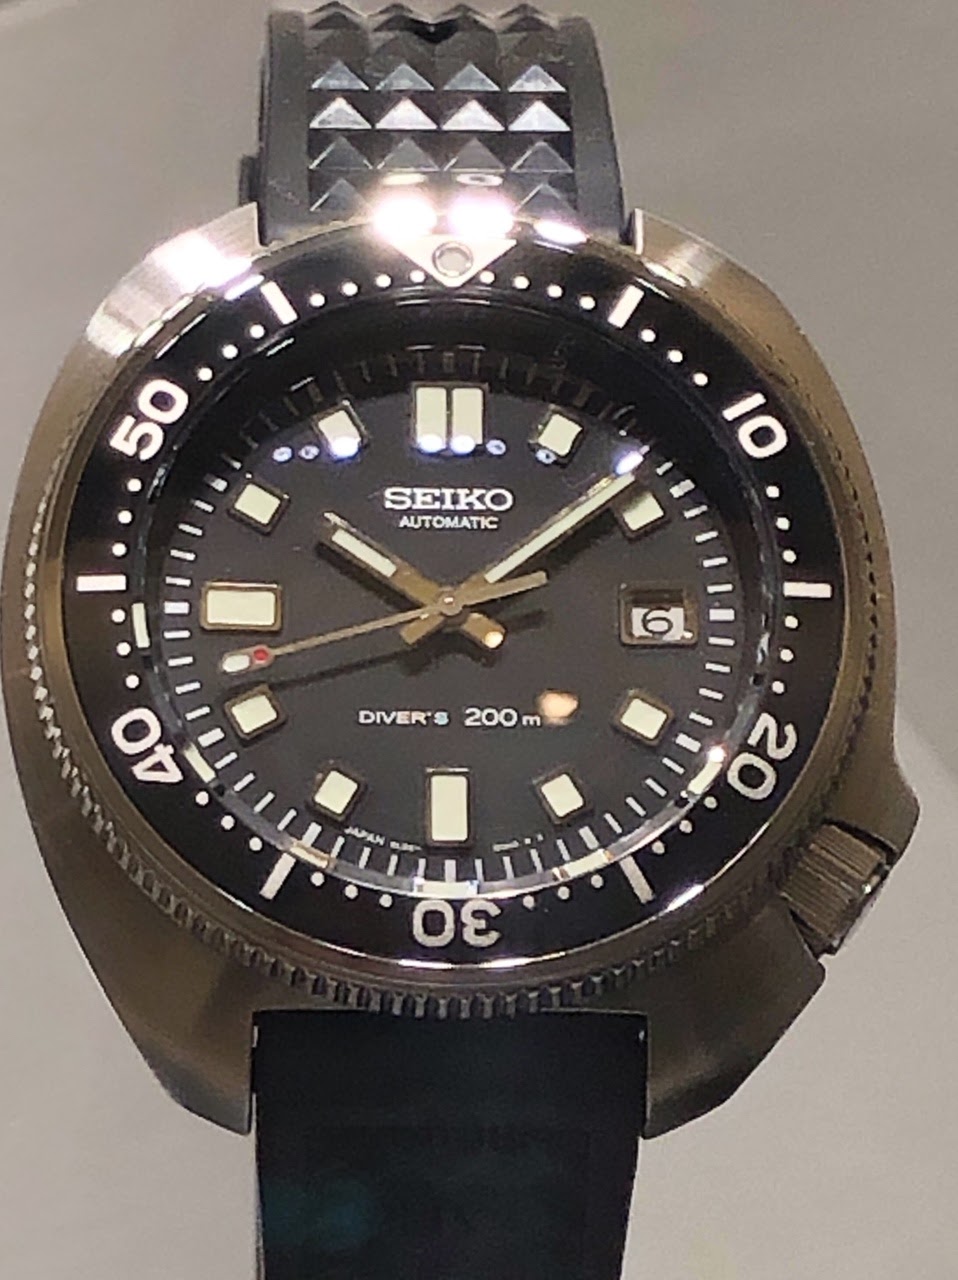 Basel/SIHH 2015 - BaselWorld 2019- Part 3: Seiko and others